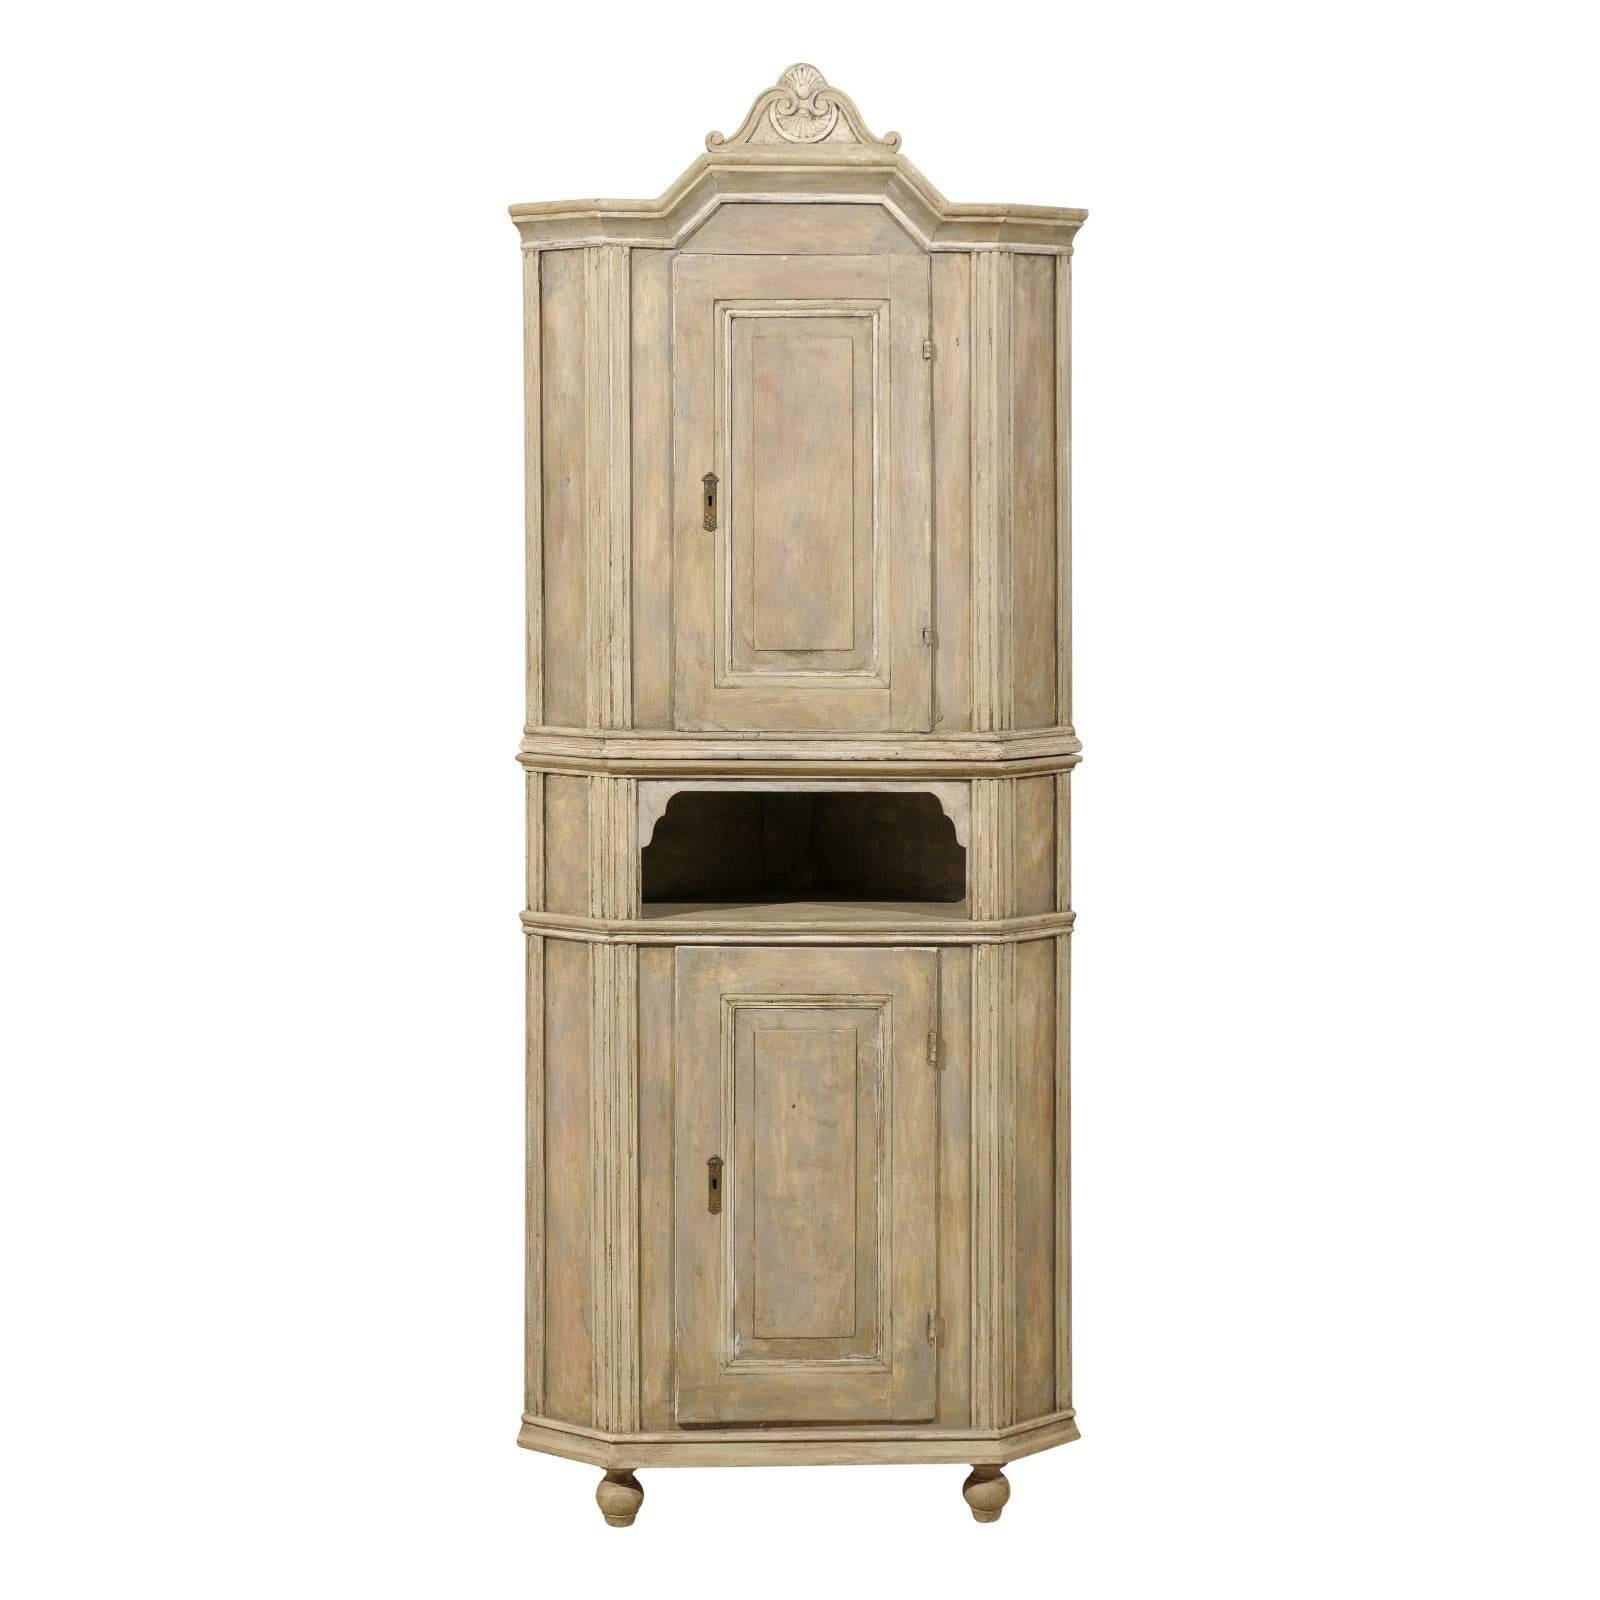 Swedish Early 19th C. Painted 2-Door Corner Cabinet with Carved Pediment Bonnet